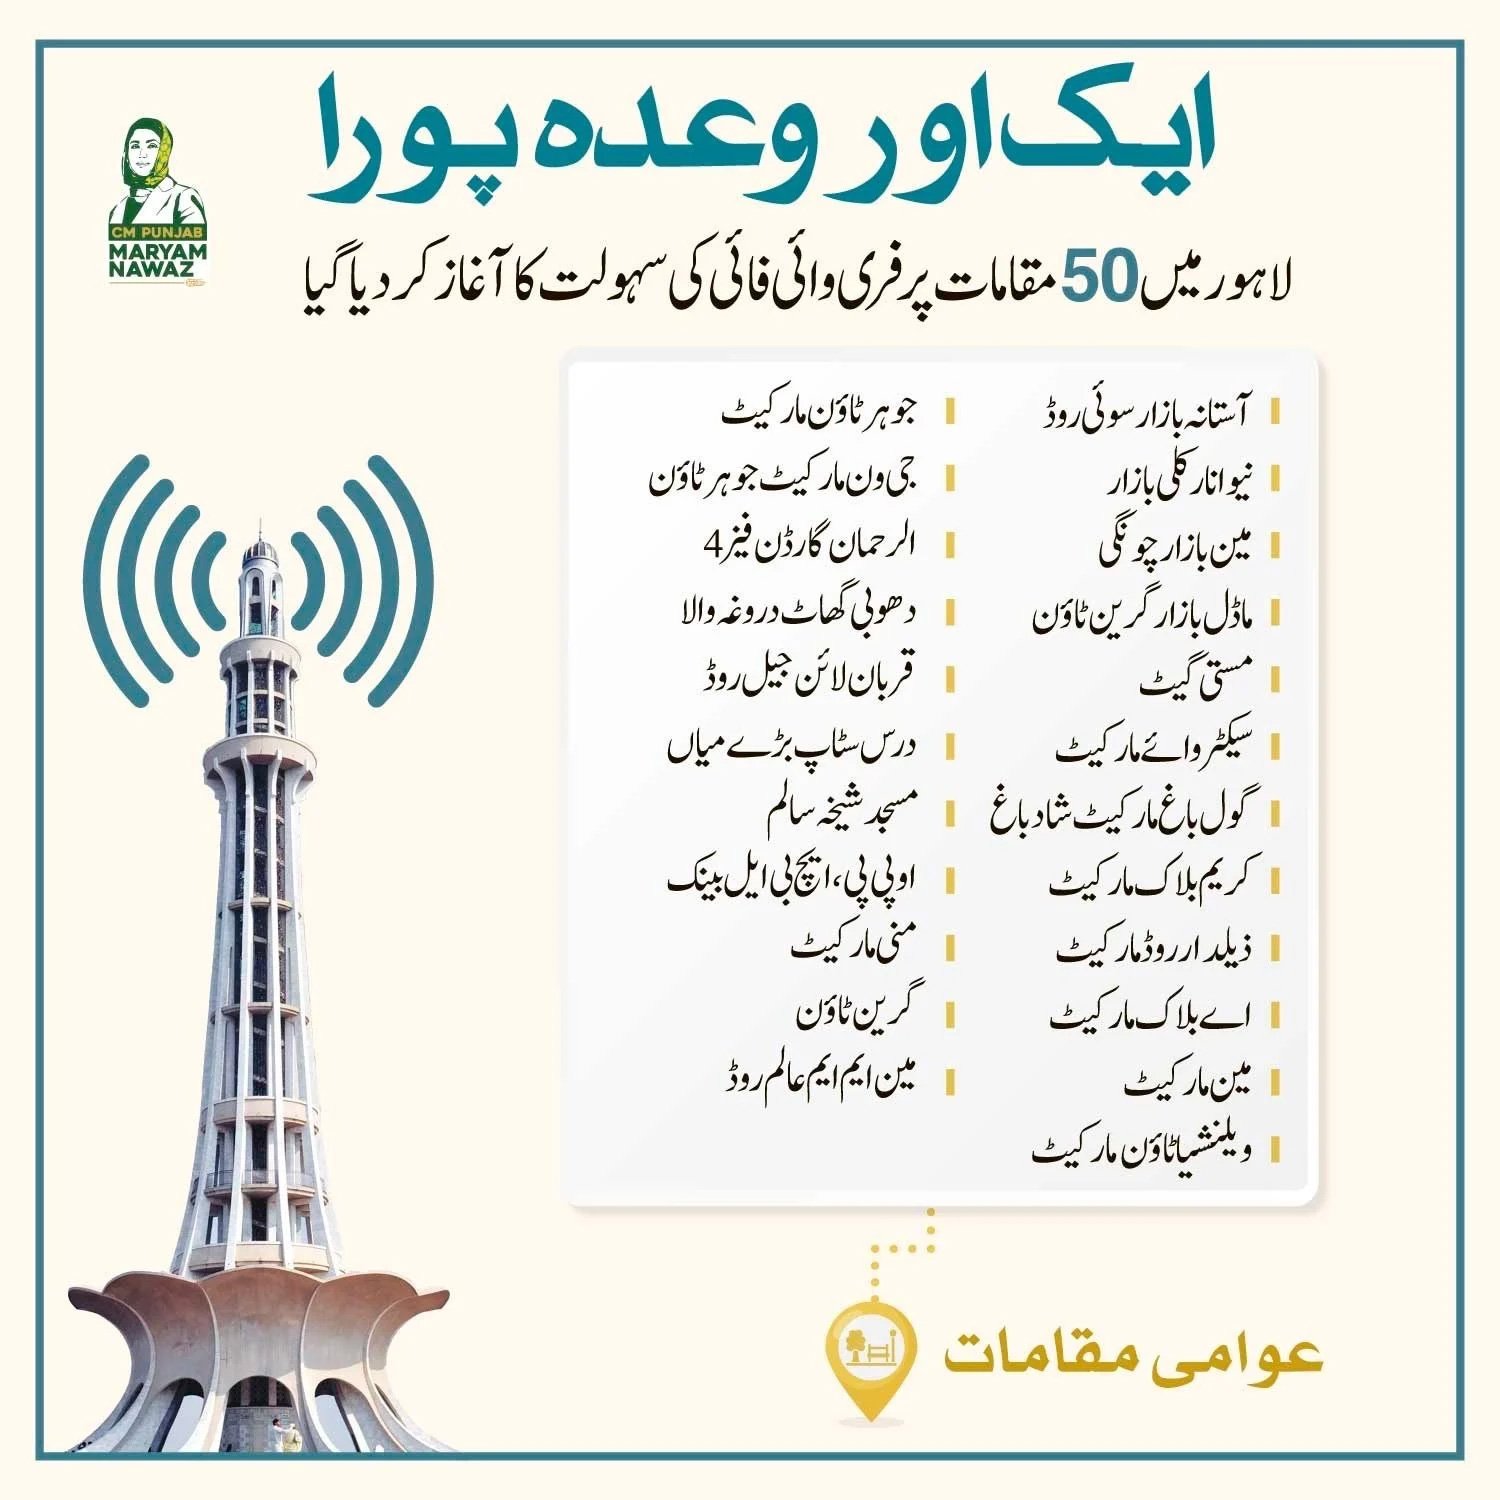 Punjab’s Free WiFi project: Complimentary access for public launched at 50 spots in Lahore